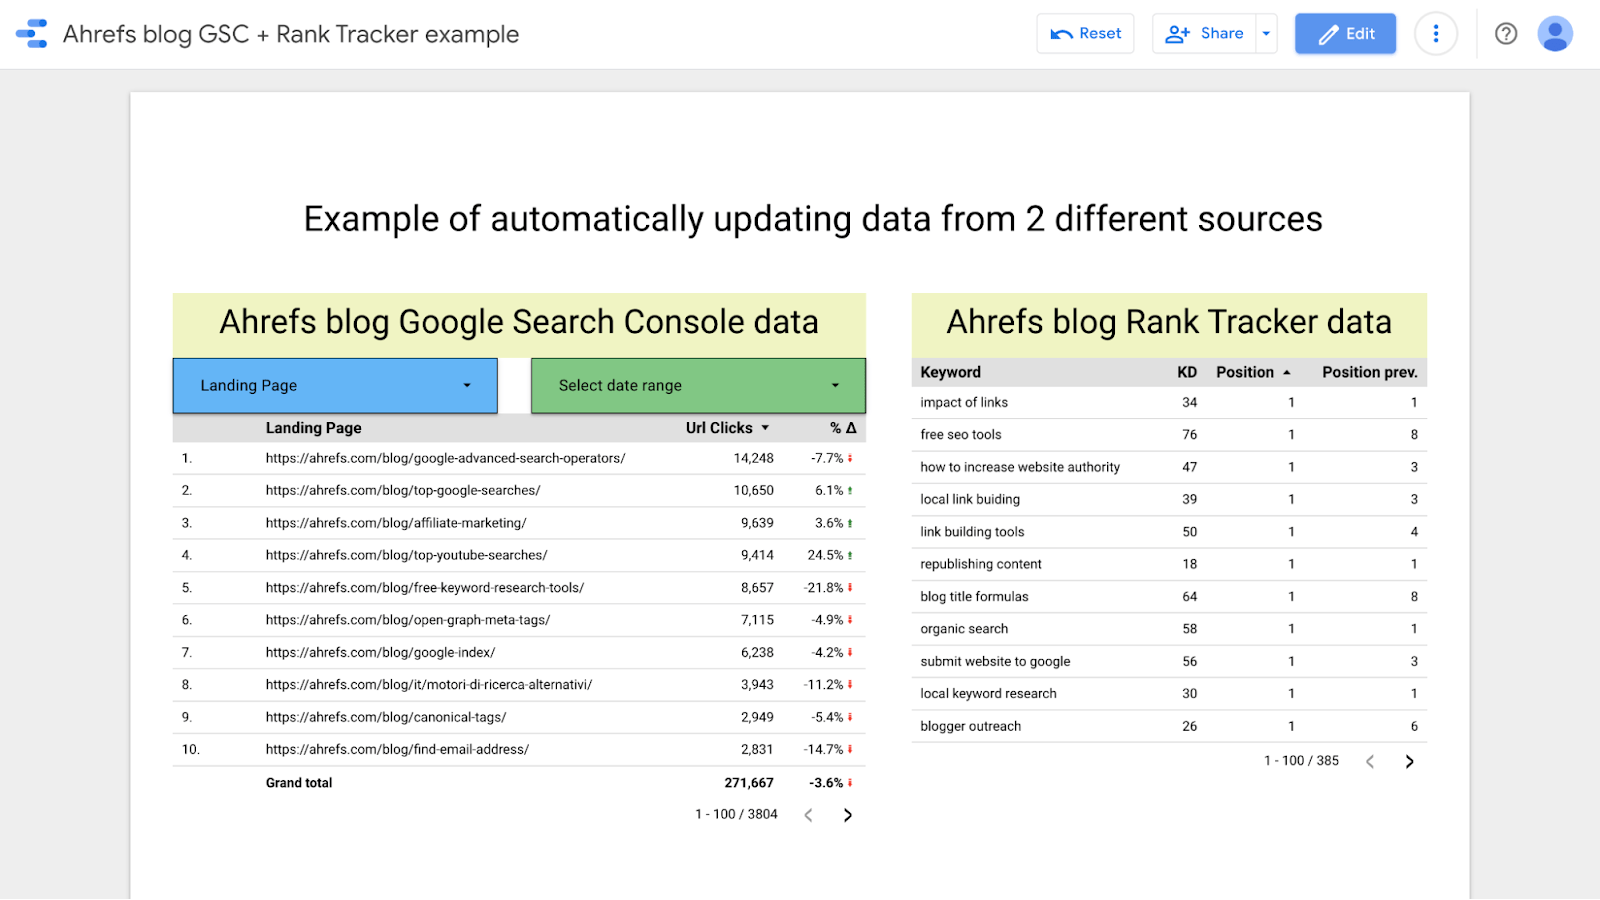 Data on the Ahrefs blog from GSC and Ahrefs' Rank Tracker, respectively, pulled onto one report